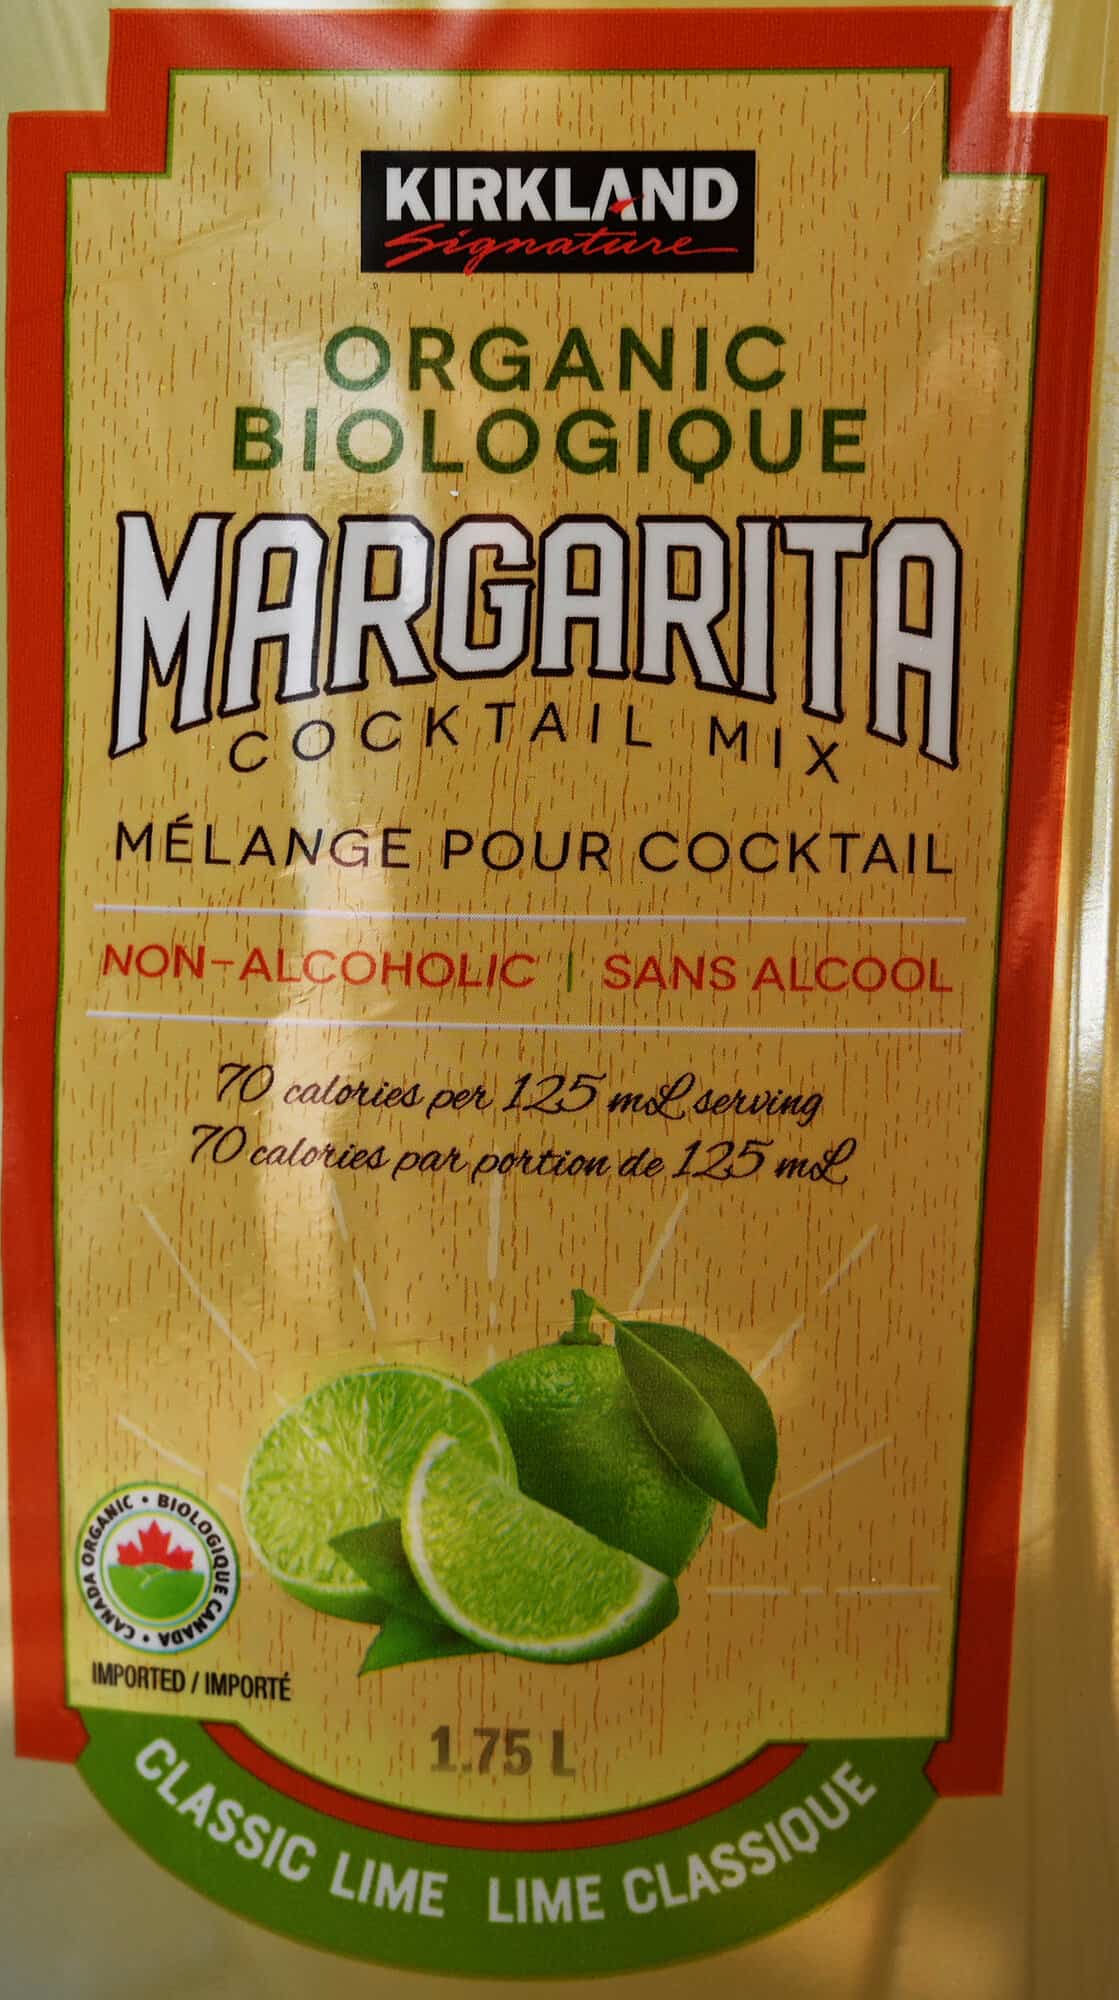 Closeup image of the front label on the Kirkland Signature Organic Margarita Mix showing the calories and that it's non-alcoholic.